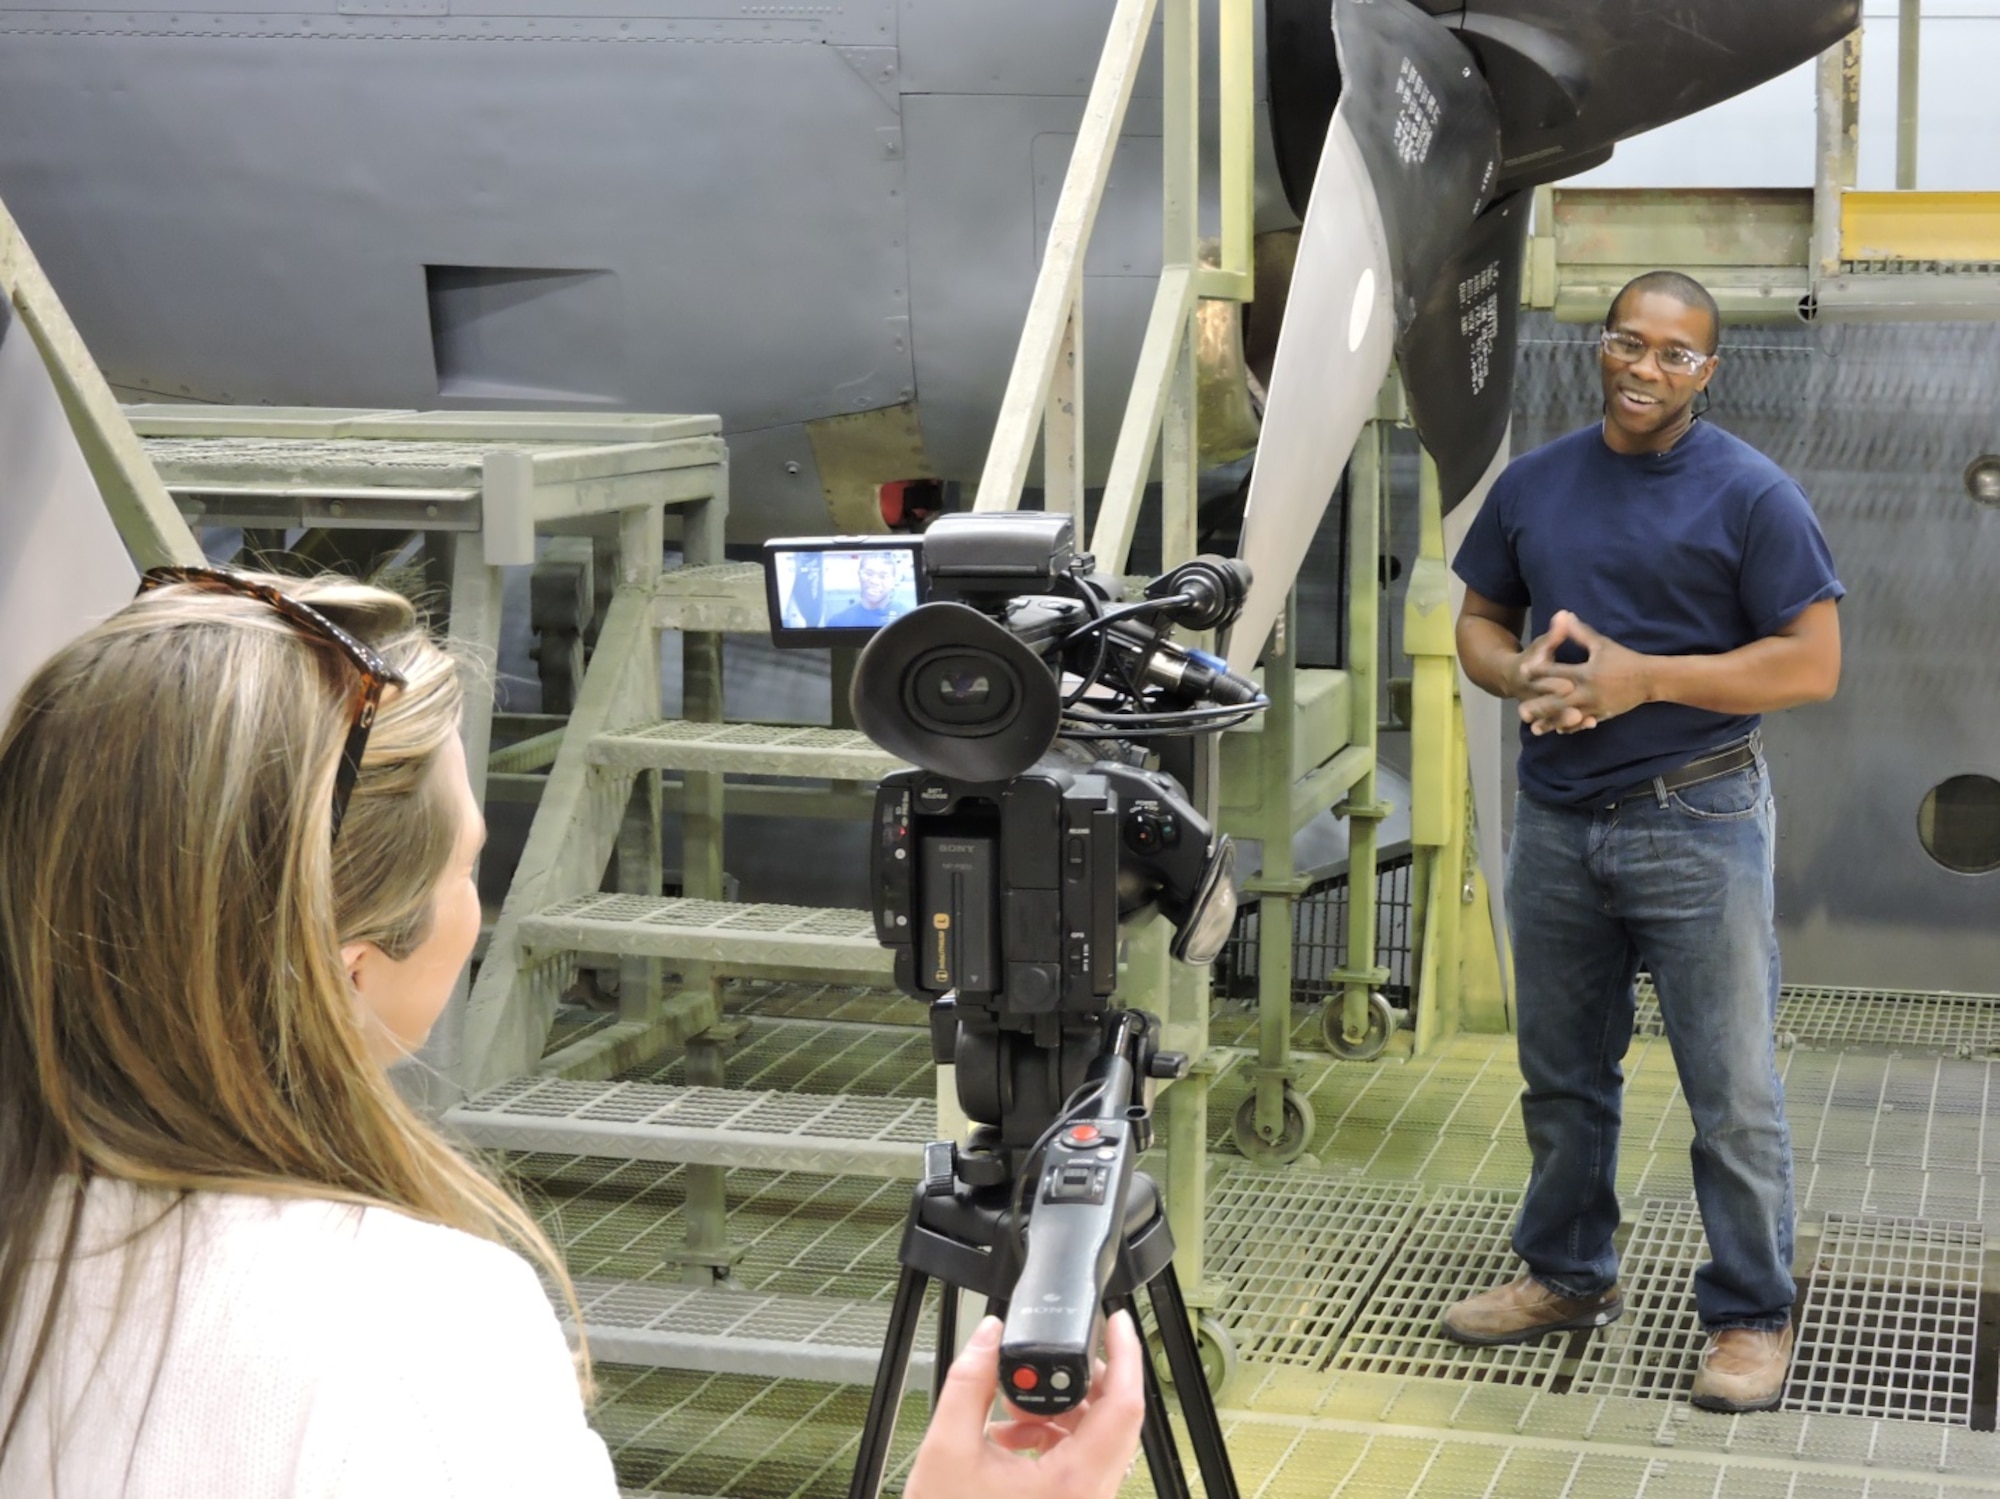 Terry Lowe, C-130 Paint Shop, tells of the pride he has when a newly painted aircraft leaves the hangar to return to service. The 402nd AMXSS Aircraft paint/de-paint process will be featured on 13WMAZ's "Behind the Lines" segment airing Feb. 26 on the 6 p.m. Eyewitness News. (U.S. Air Force photo by Roland Leach) 


